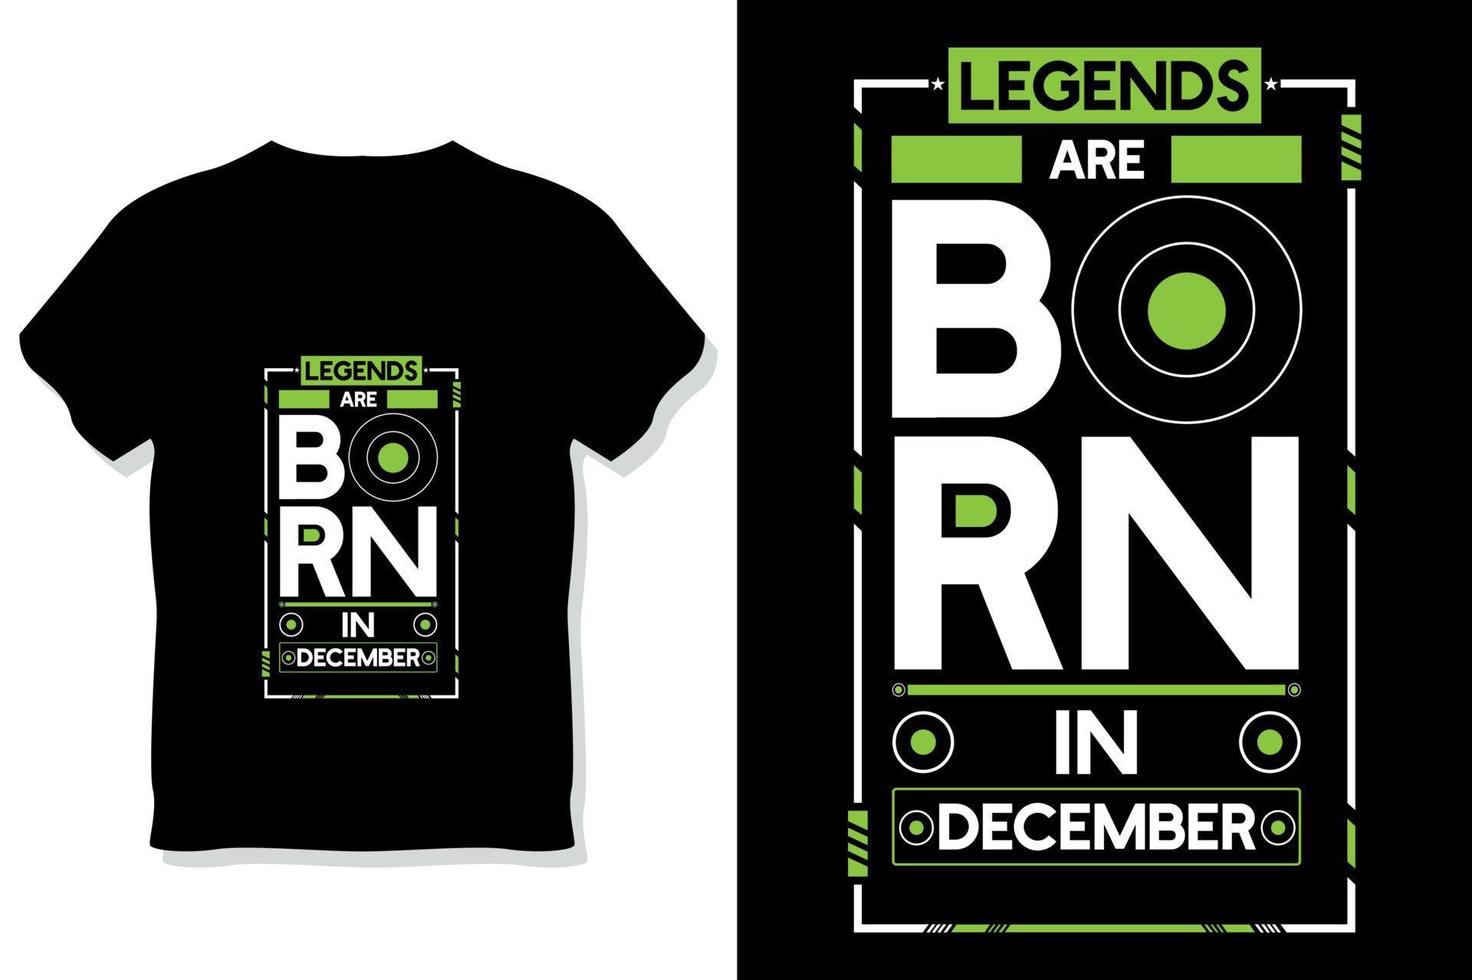 Legends are born in  December birthday quotes t shirt design vector